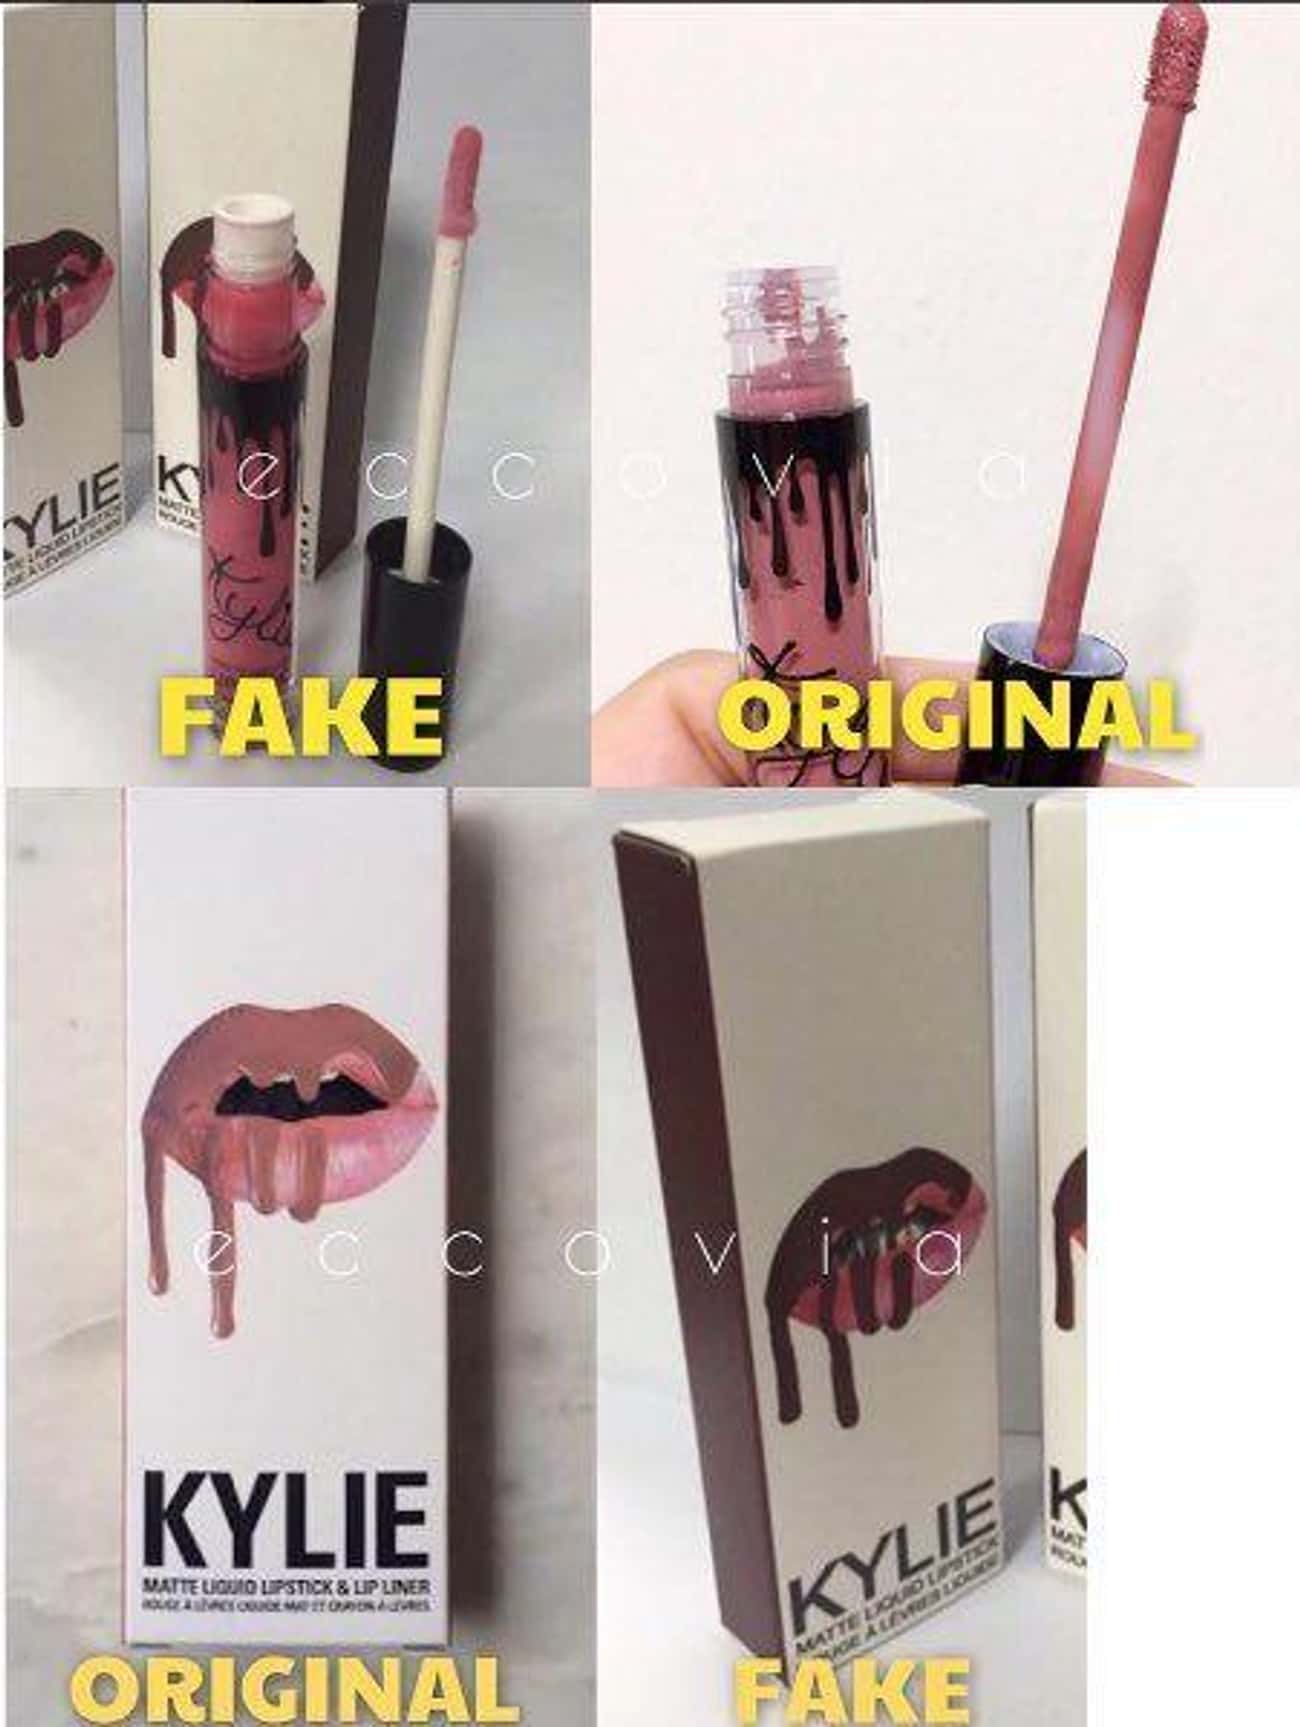 Counterfeit Makeup Can Contain Dangerous Ingredients Like Paint Thinner, Lead, And Mercury